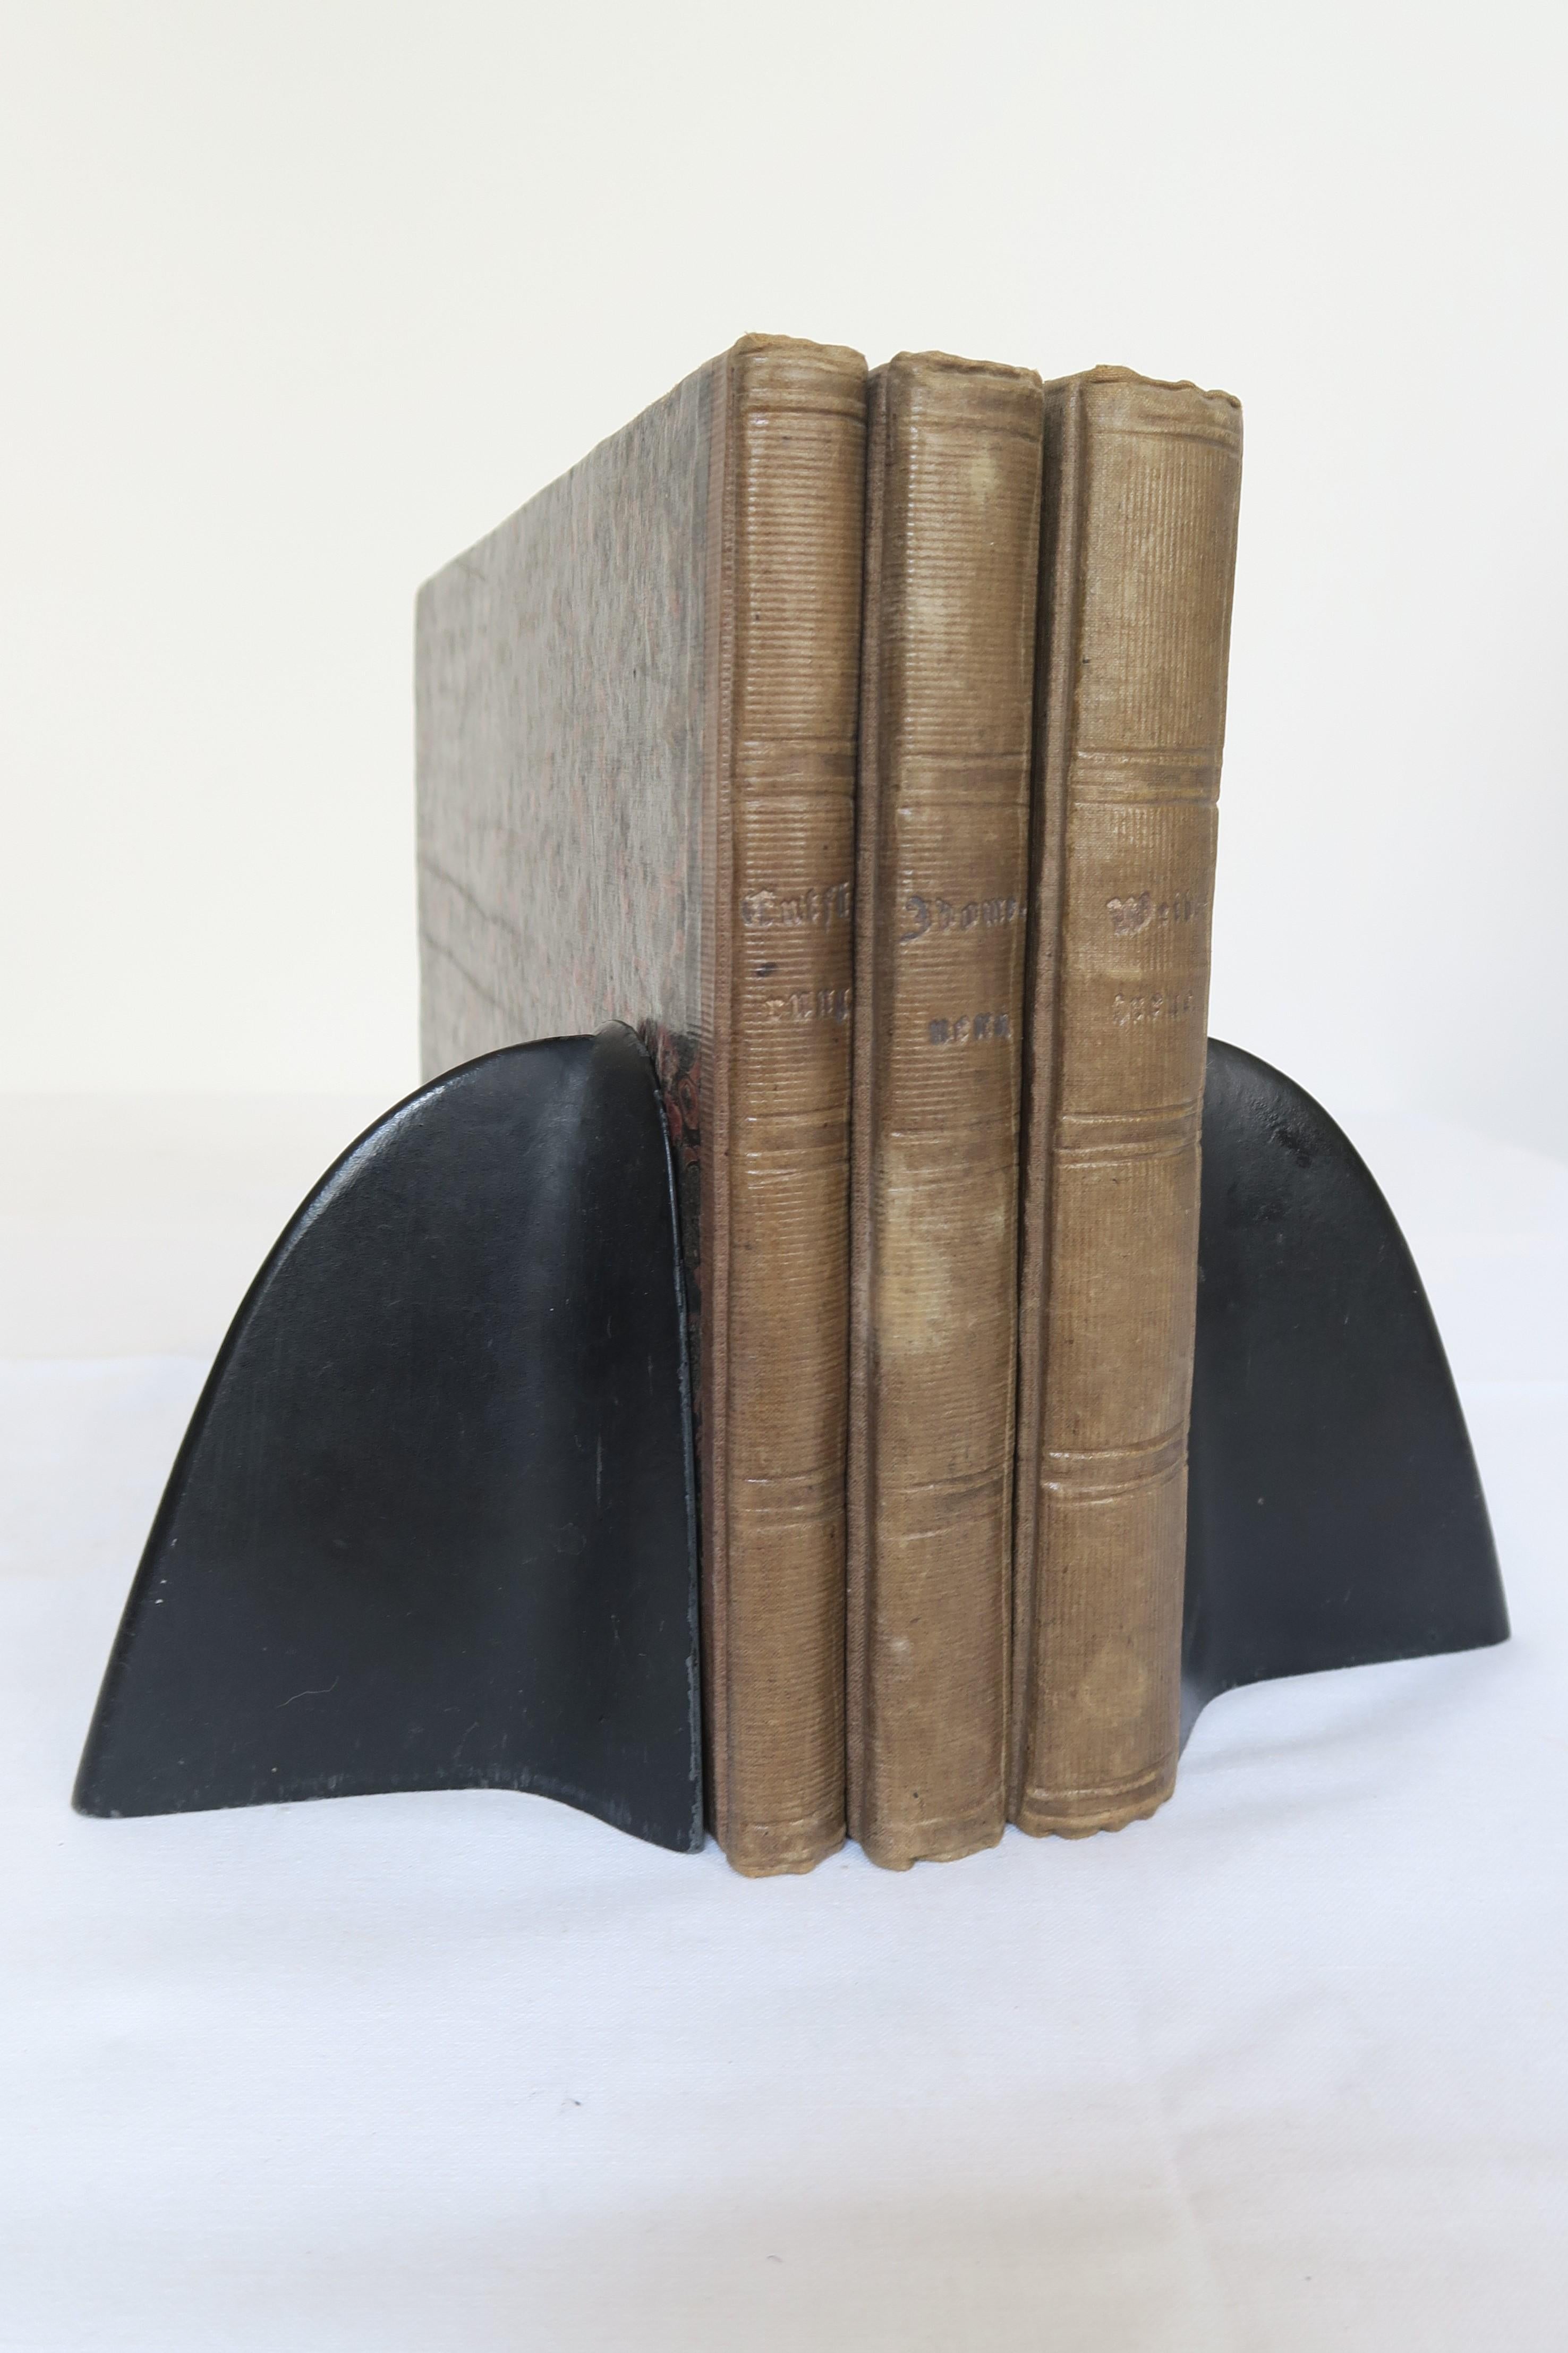 Vintage, made in the very first pre-War period of the existence of the Werkstätte Auböck in Vienna.
Model number: 3531 - Illustrated in the exhibition catalogue of the Vienna Historical Museum.

For sale are a pair of super rare bookends. Auböck